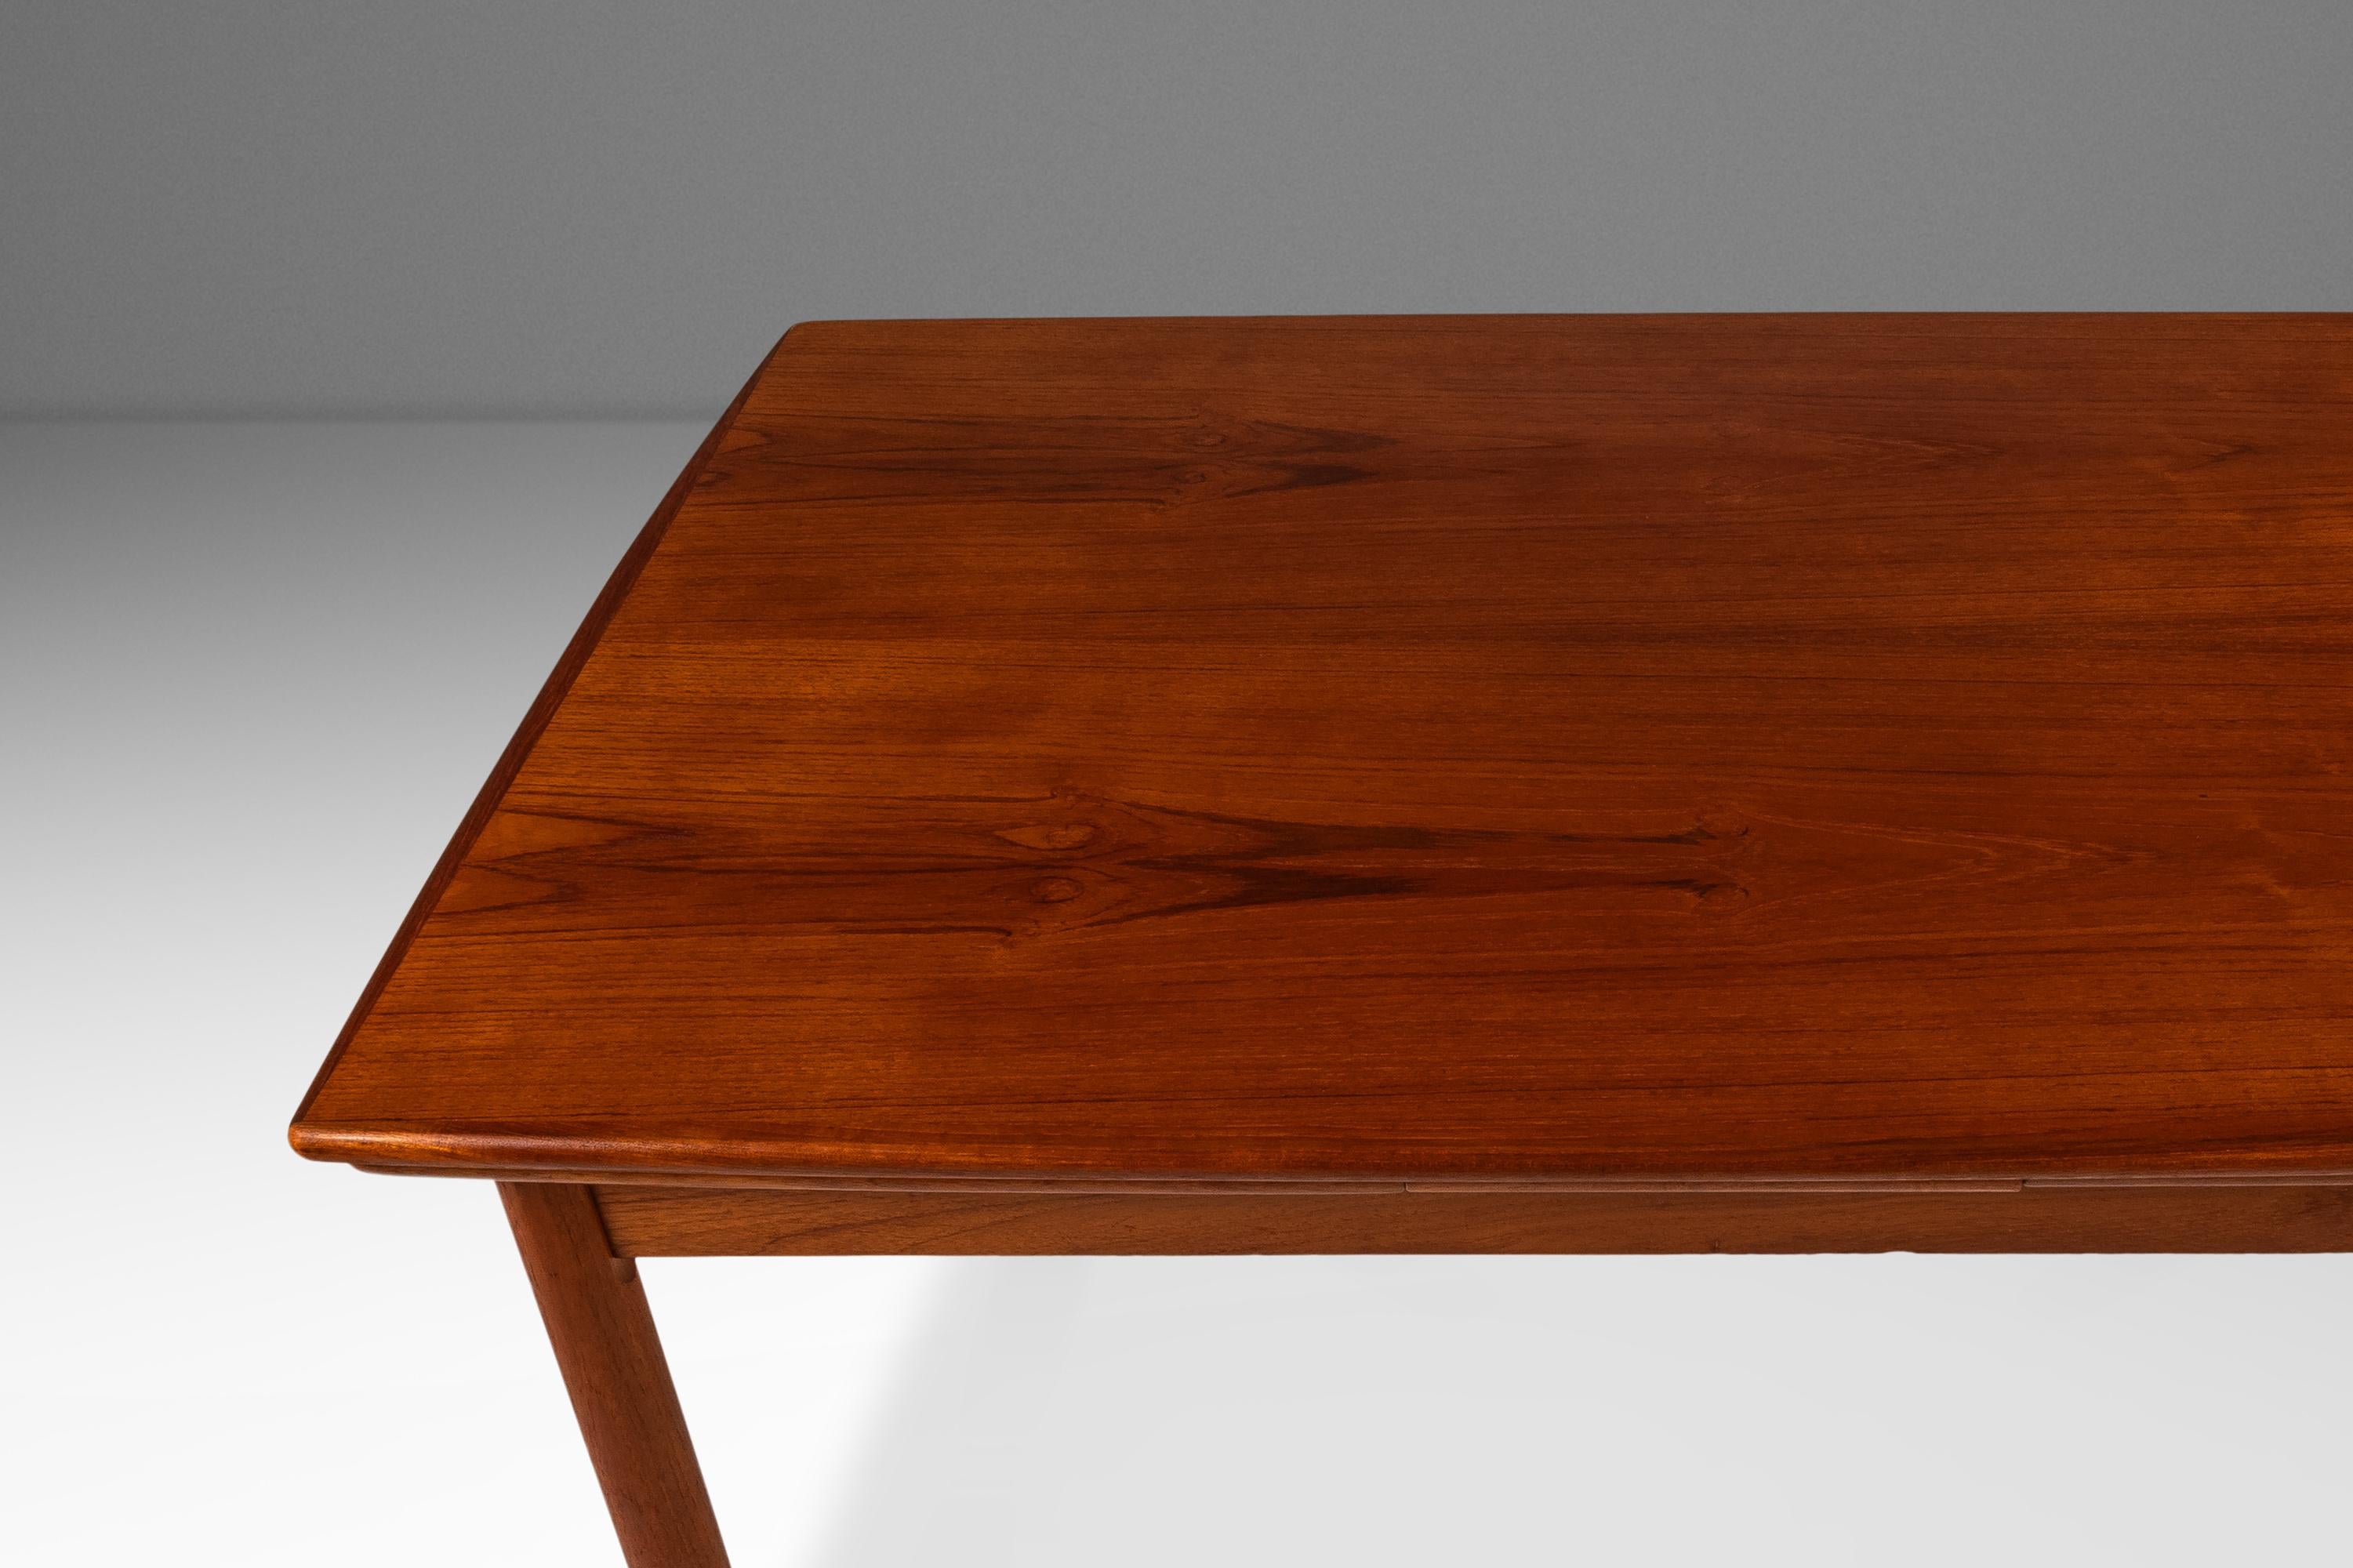 Danish Modern Expansion Dining Table in Teak w/ Stow-In-Table Leaves, c. 1960s For Sale 9